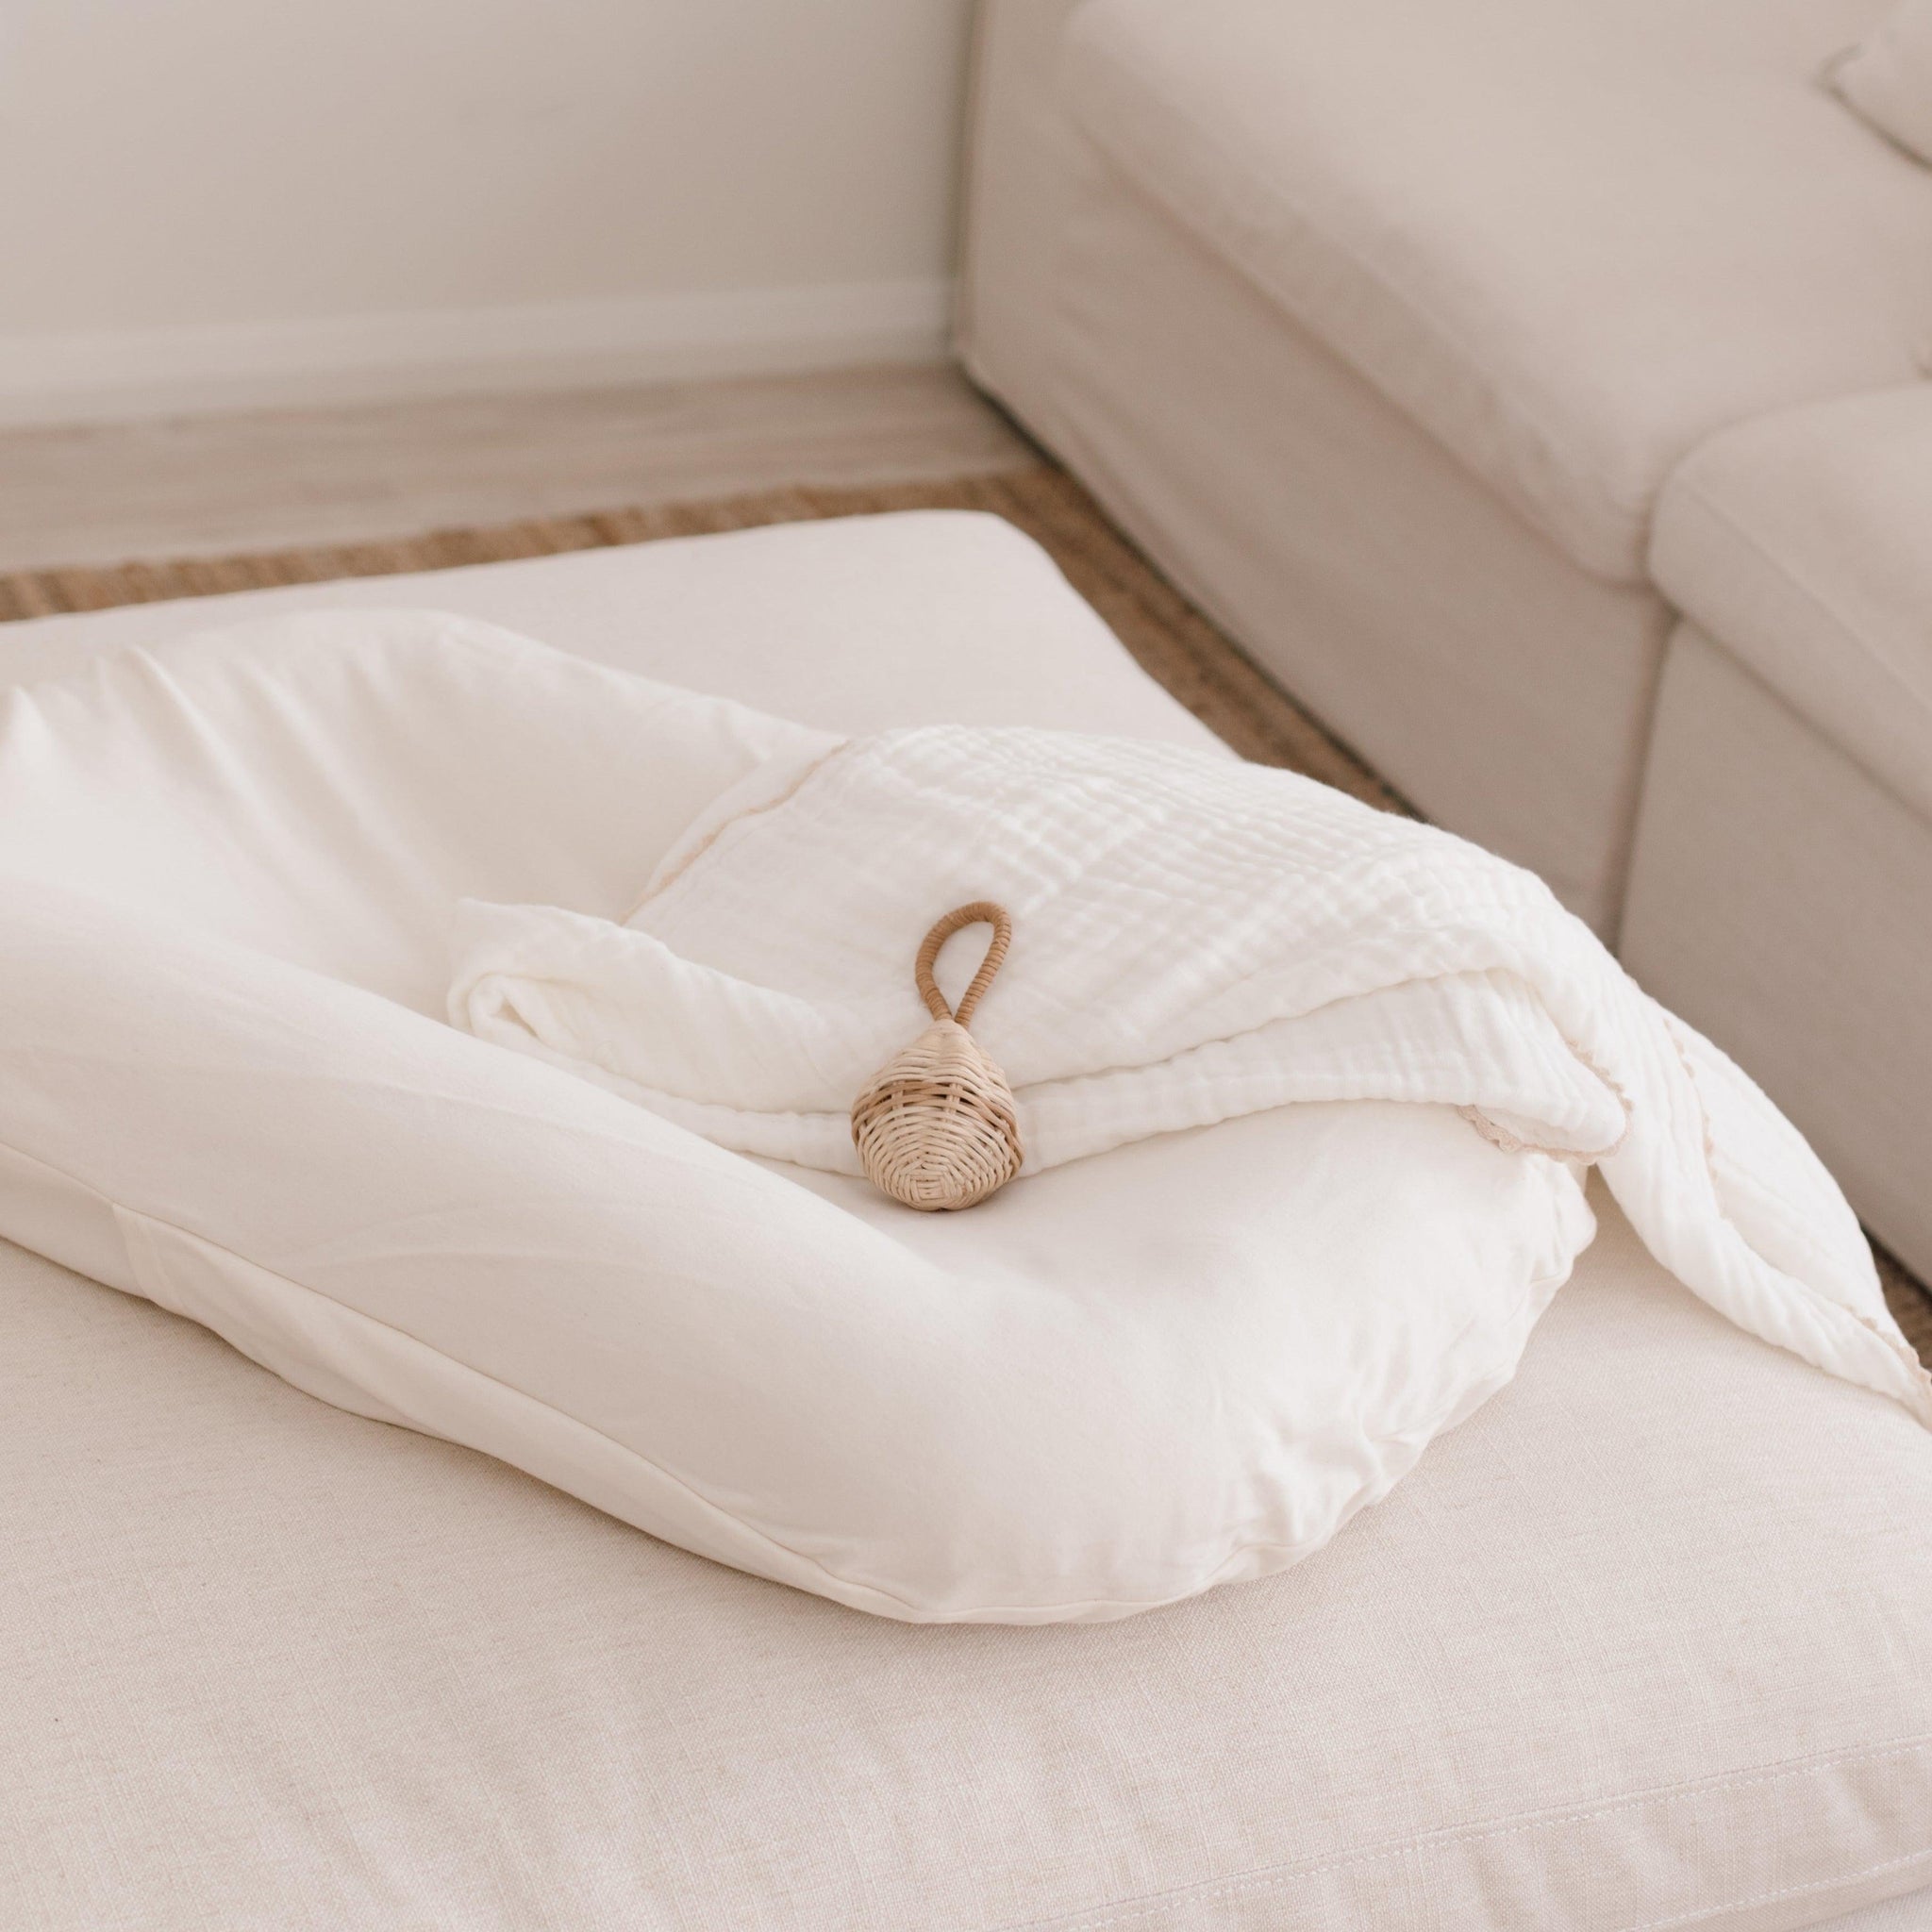 The Snuggle Me® Lounger on a woven rug with a white blanket on top next to a lounge.